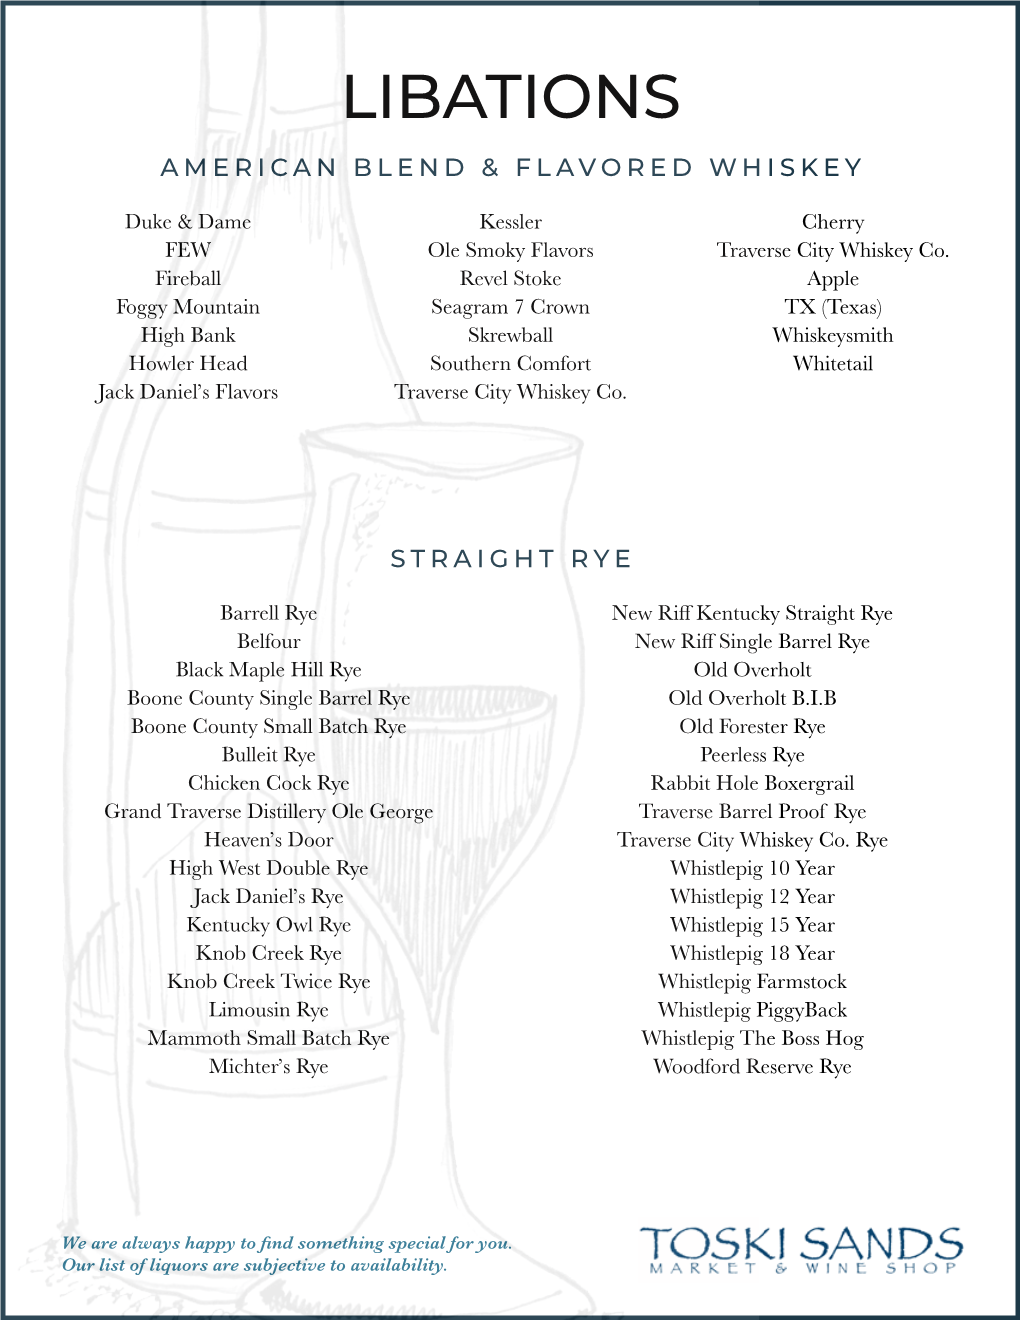 Libations American Blend & Flavored Whiskey